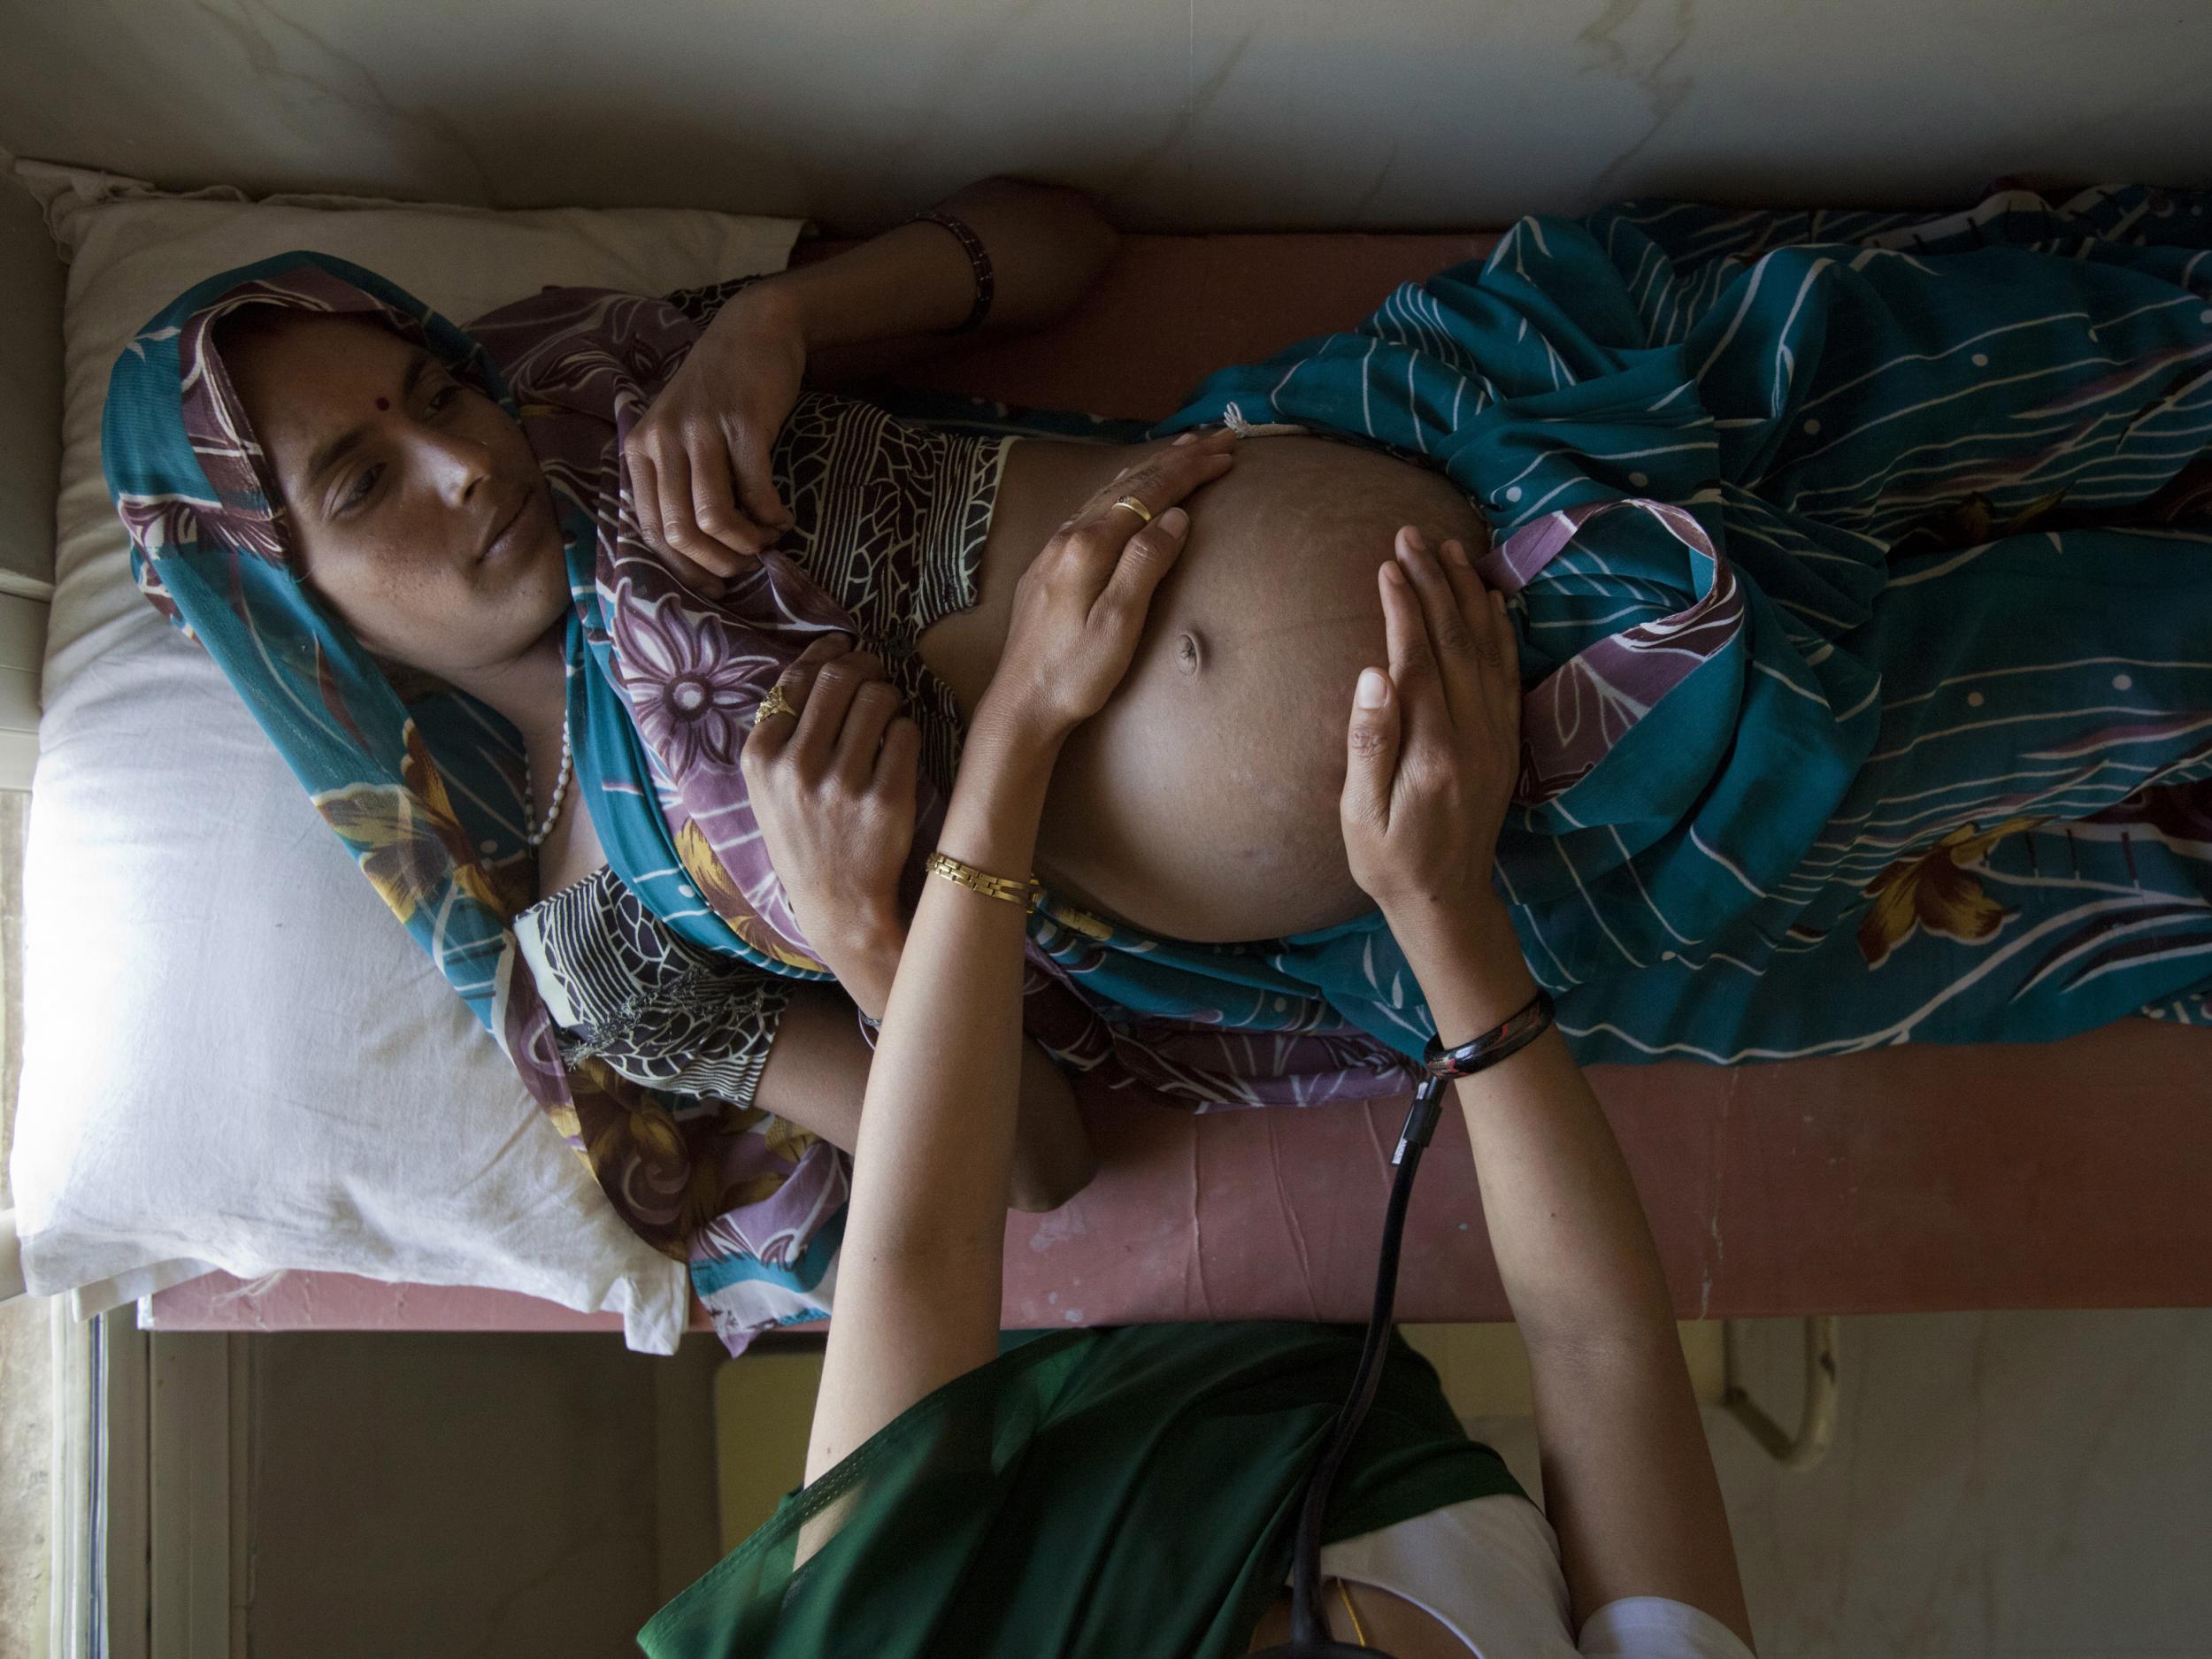 A 25-year-old pregnant woman is examined at a community health centre in the remote village of Chharchh, in the central Indian state of Madhya Pradesh